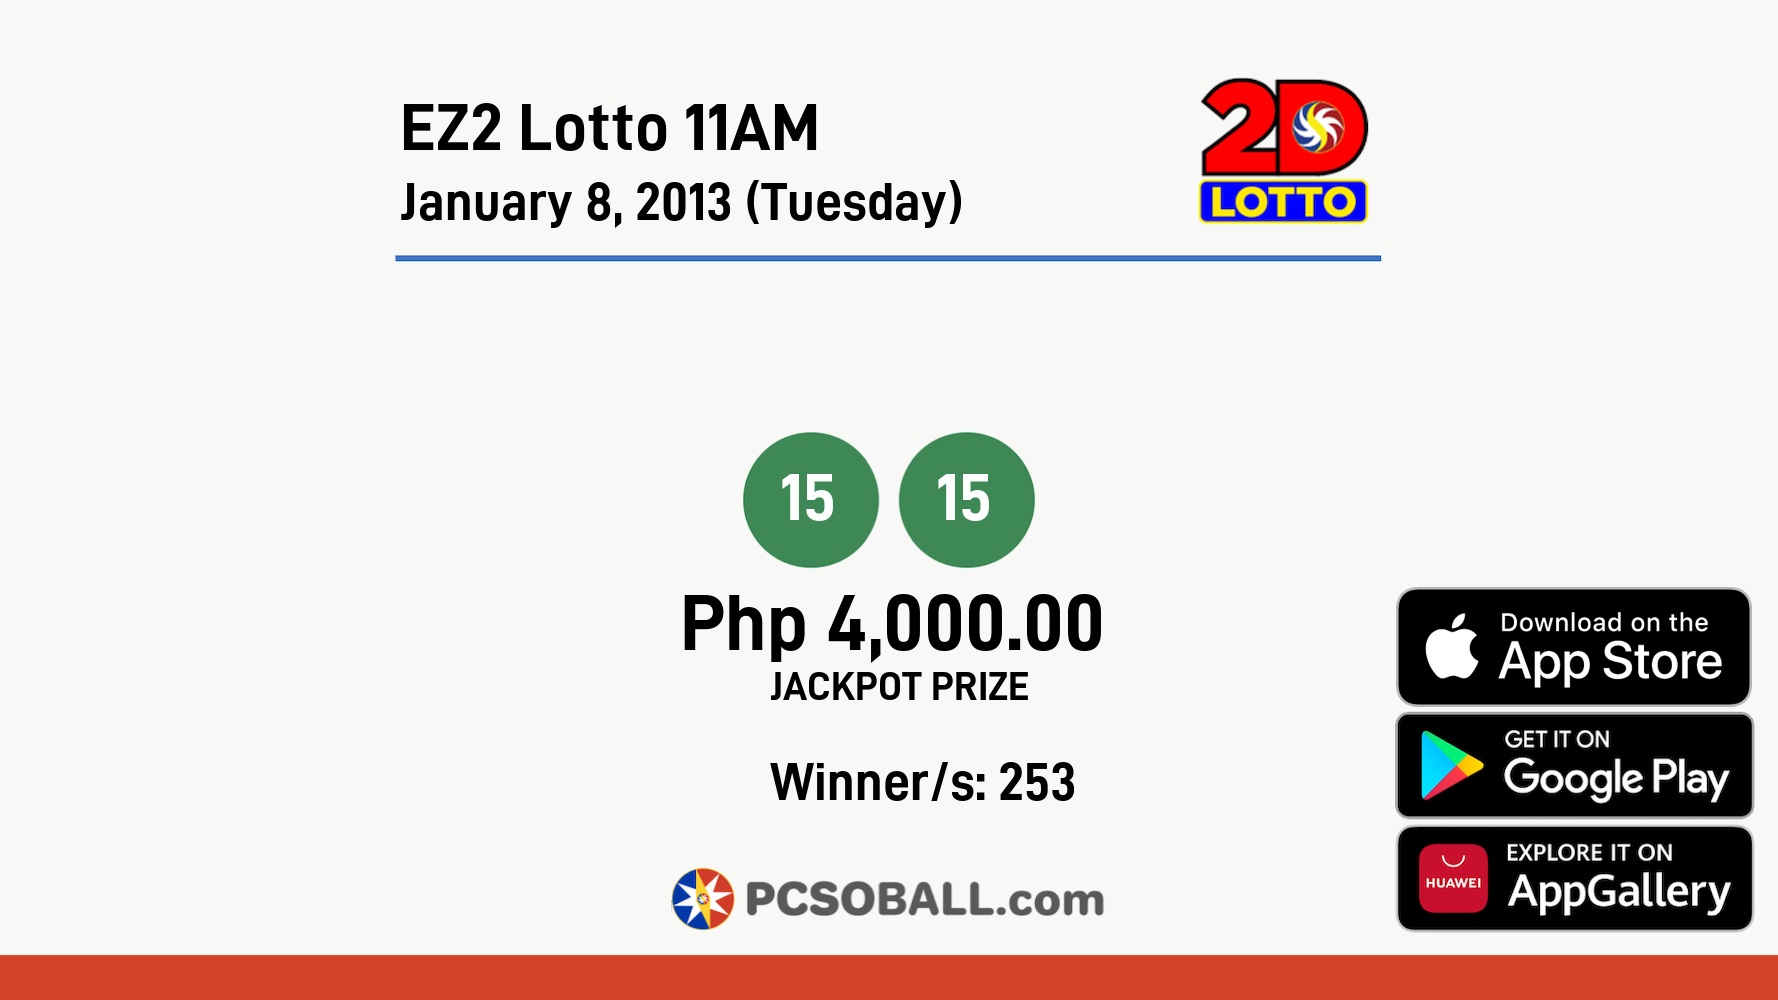 EZ2 Lotto 11AM January 8, 2013 (Tuesday) Result